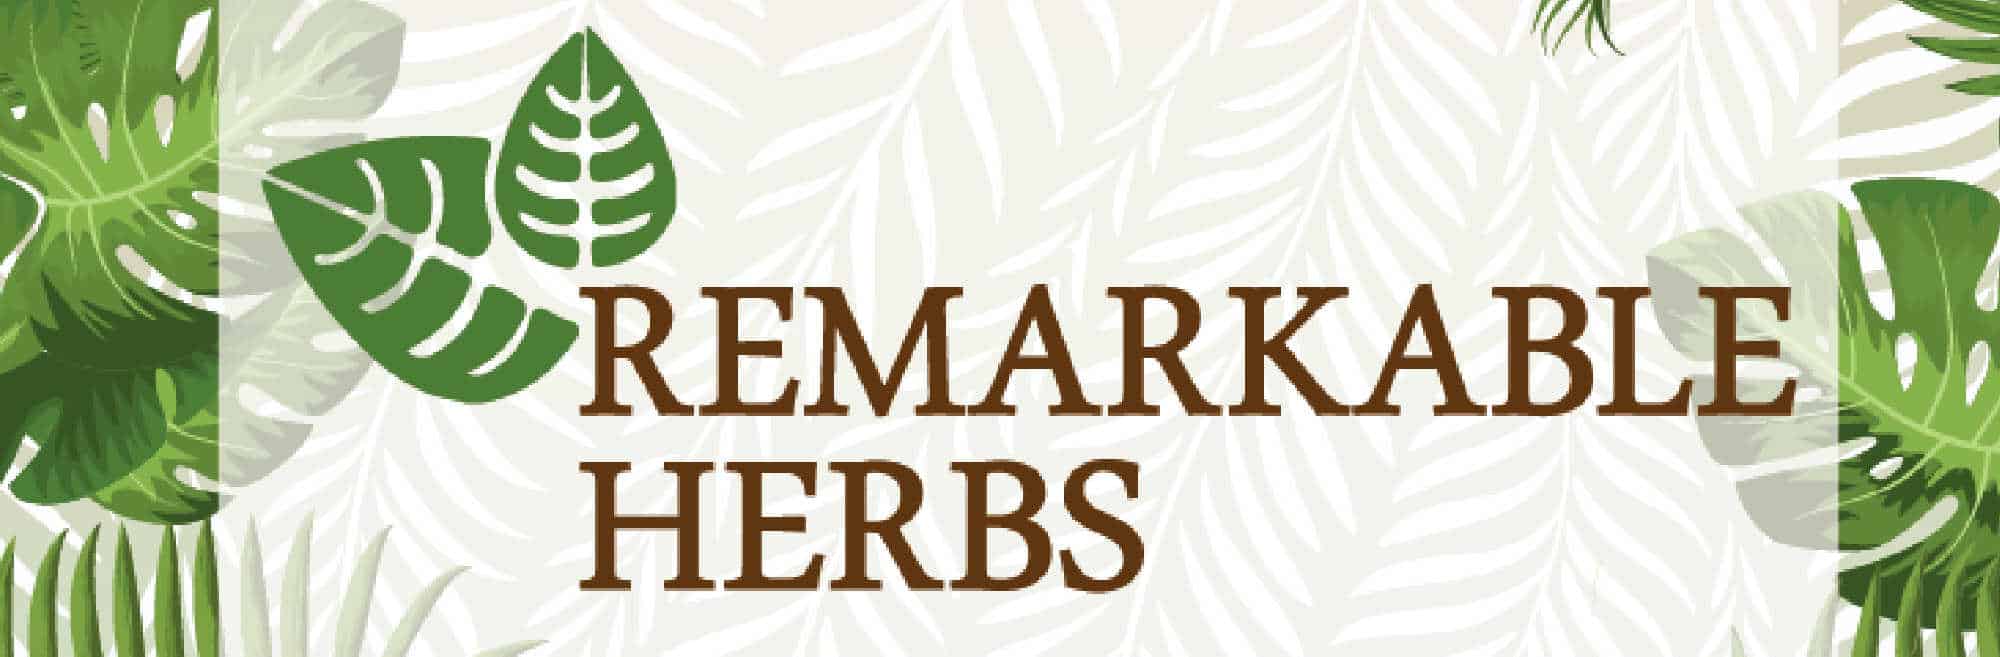 image of remarkable herbs review